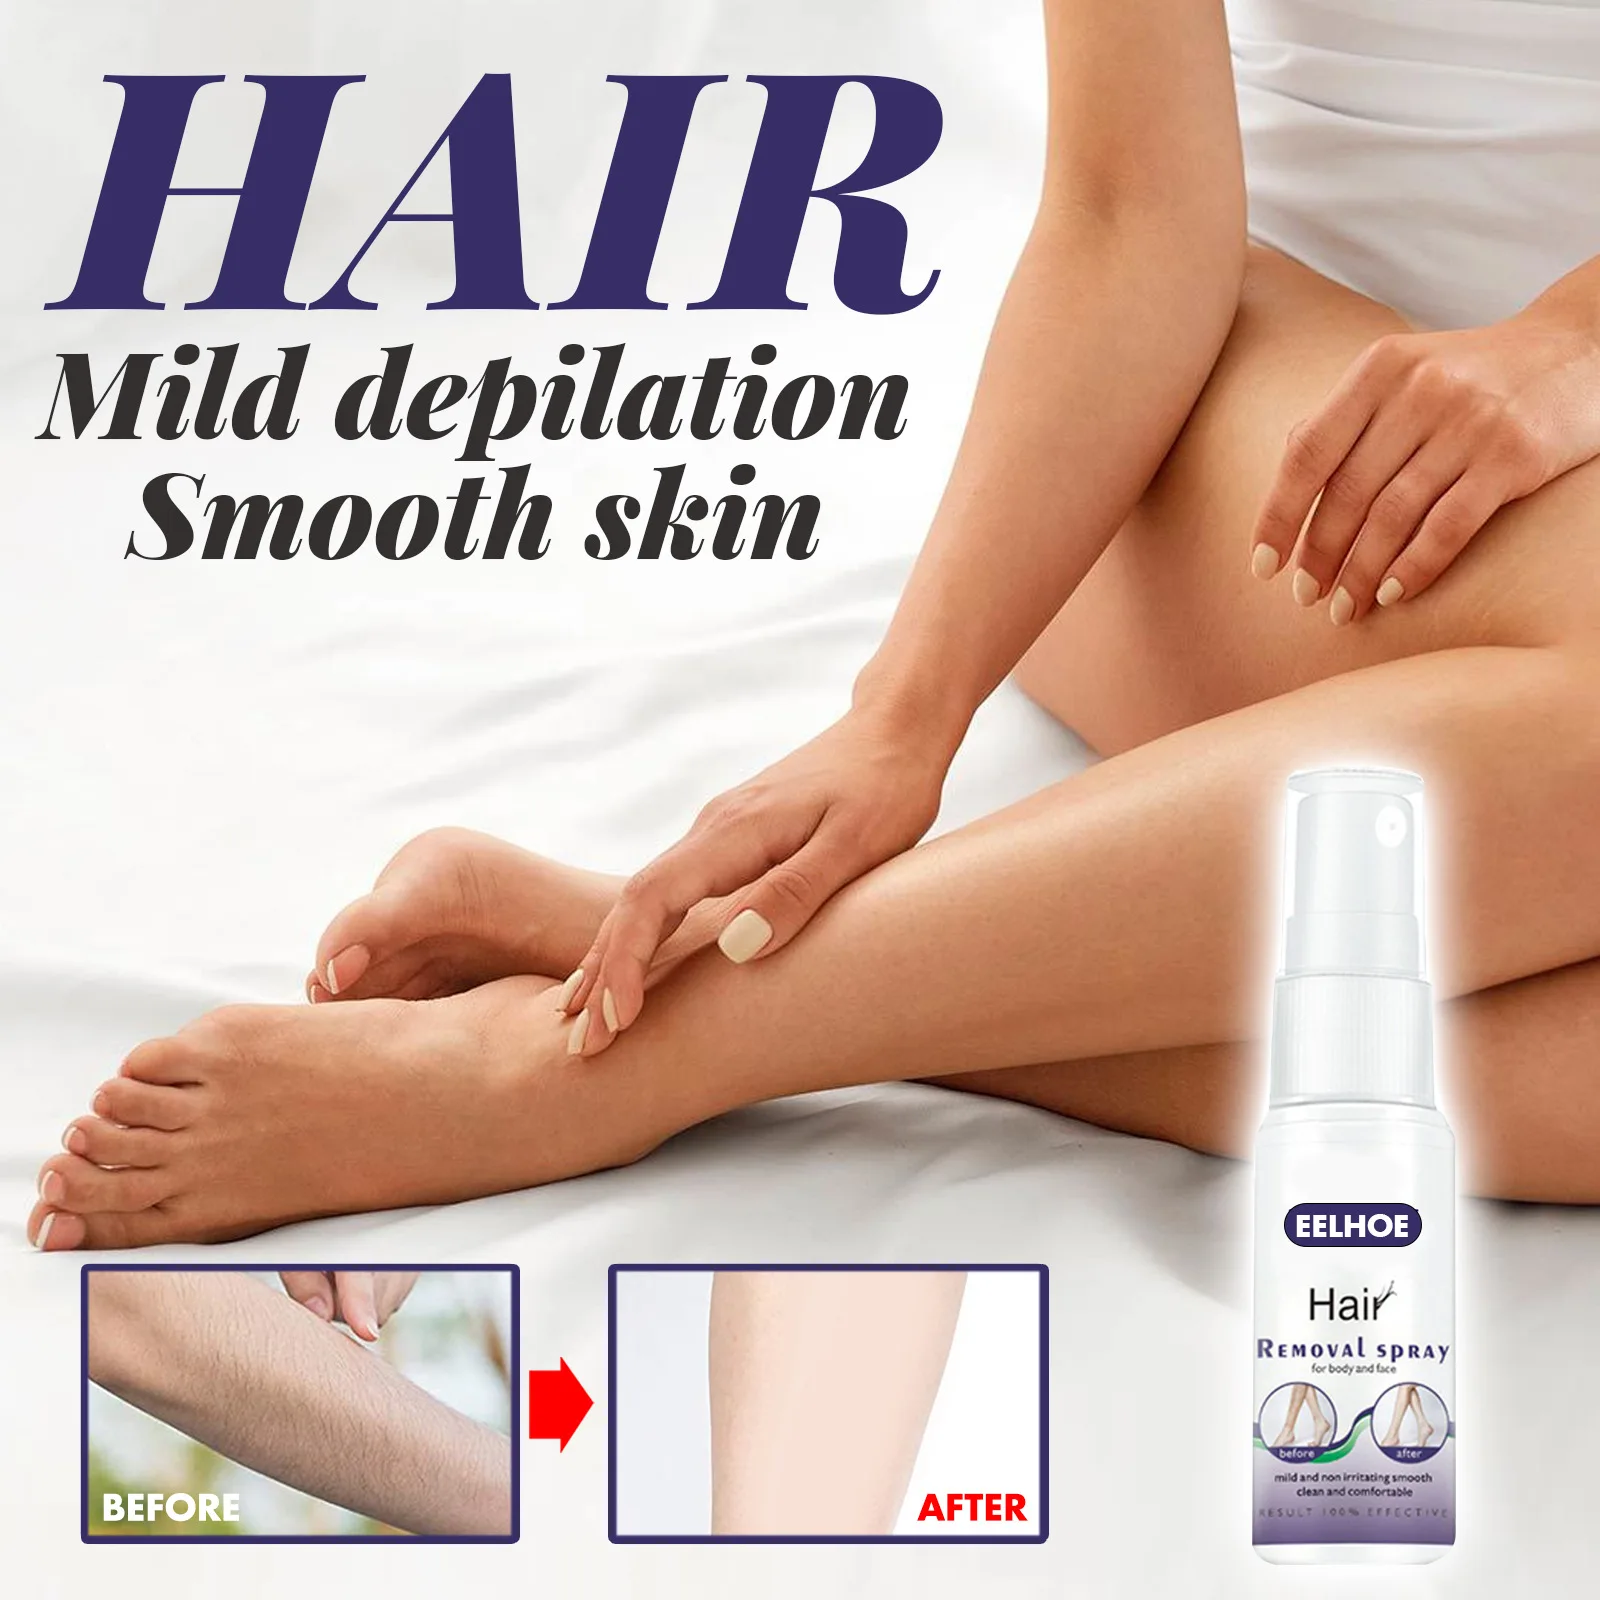 EELHOE Hair Removal Spray Armpit Hair and Leg Hair Gentle Hair Removal Cream Hair Removal Spray for Men and Women Free Shipping